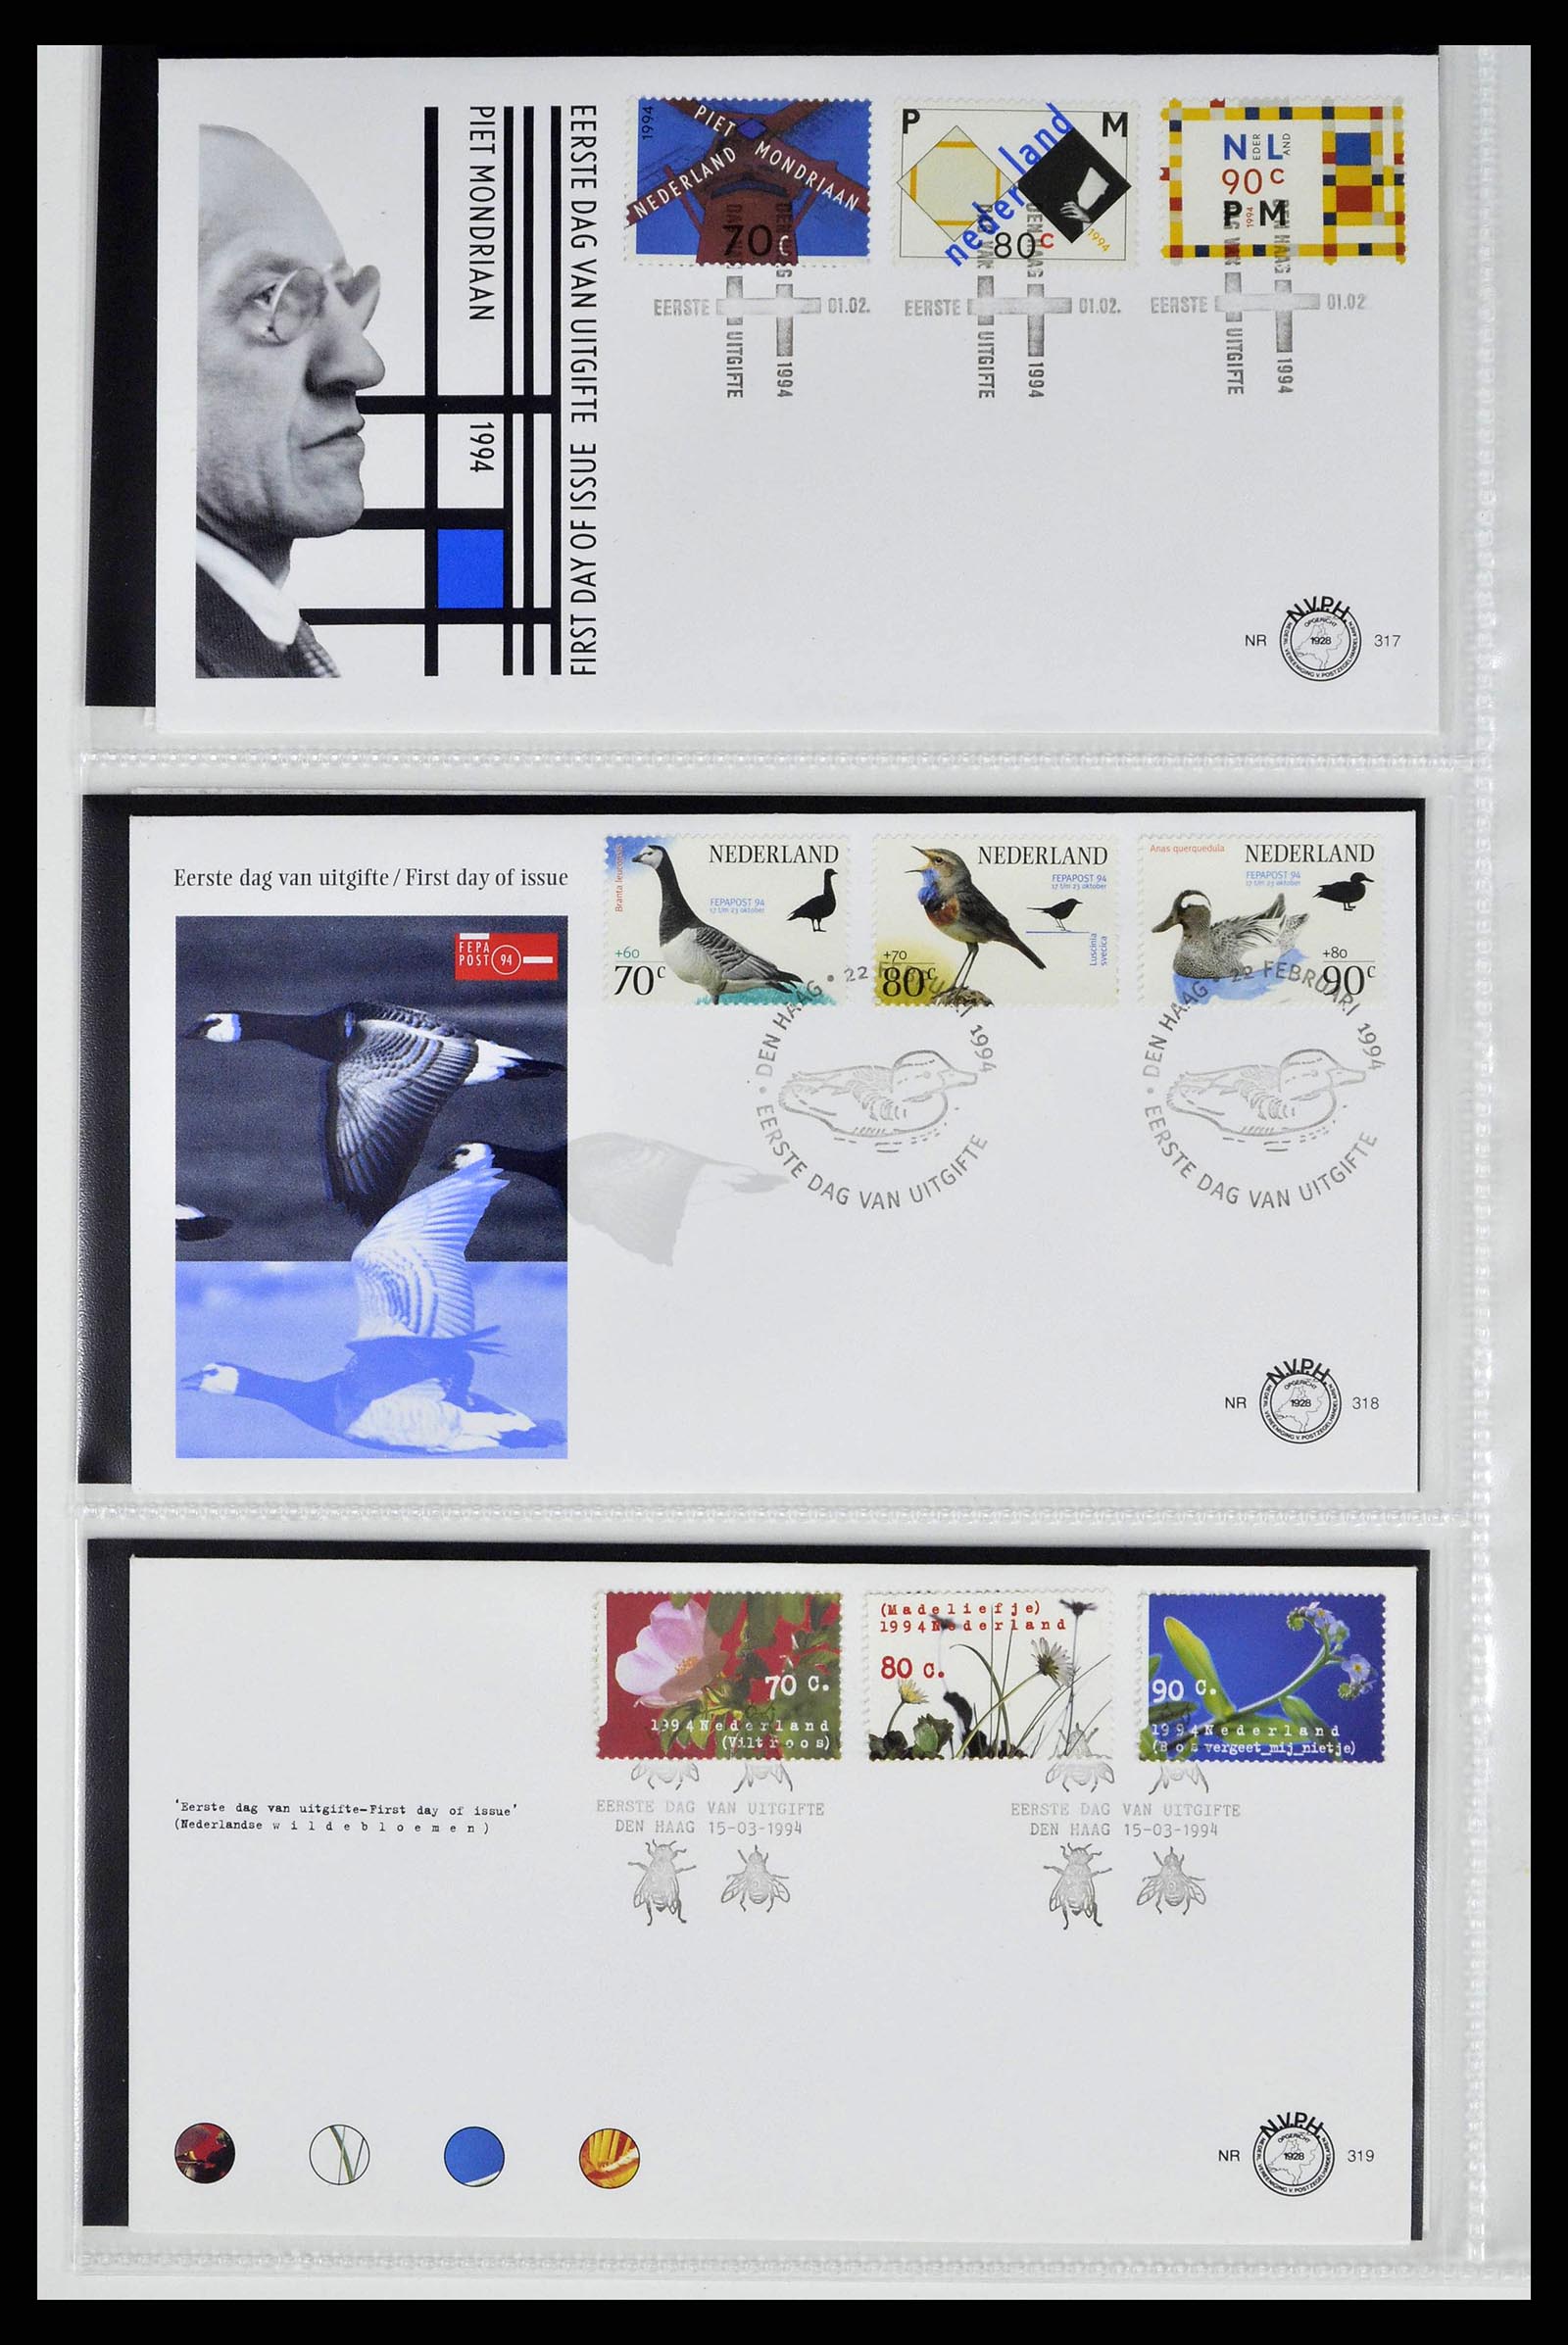 38517 0170 - Stamp collection 38517 Netherlands FDC's 1981-2011.